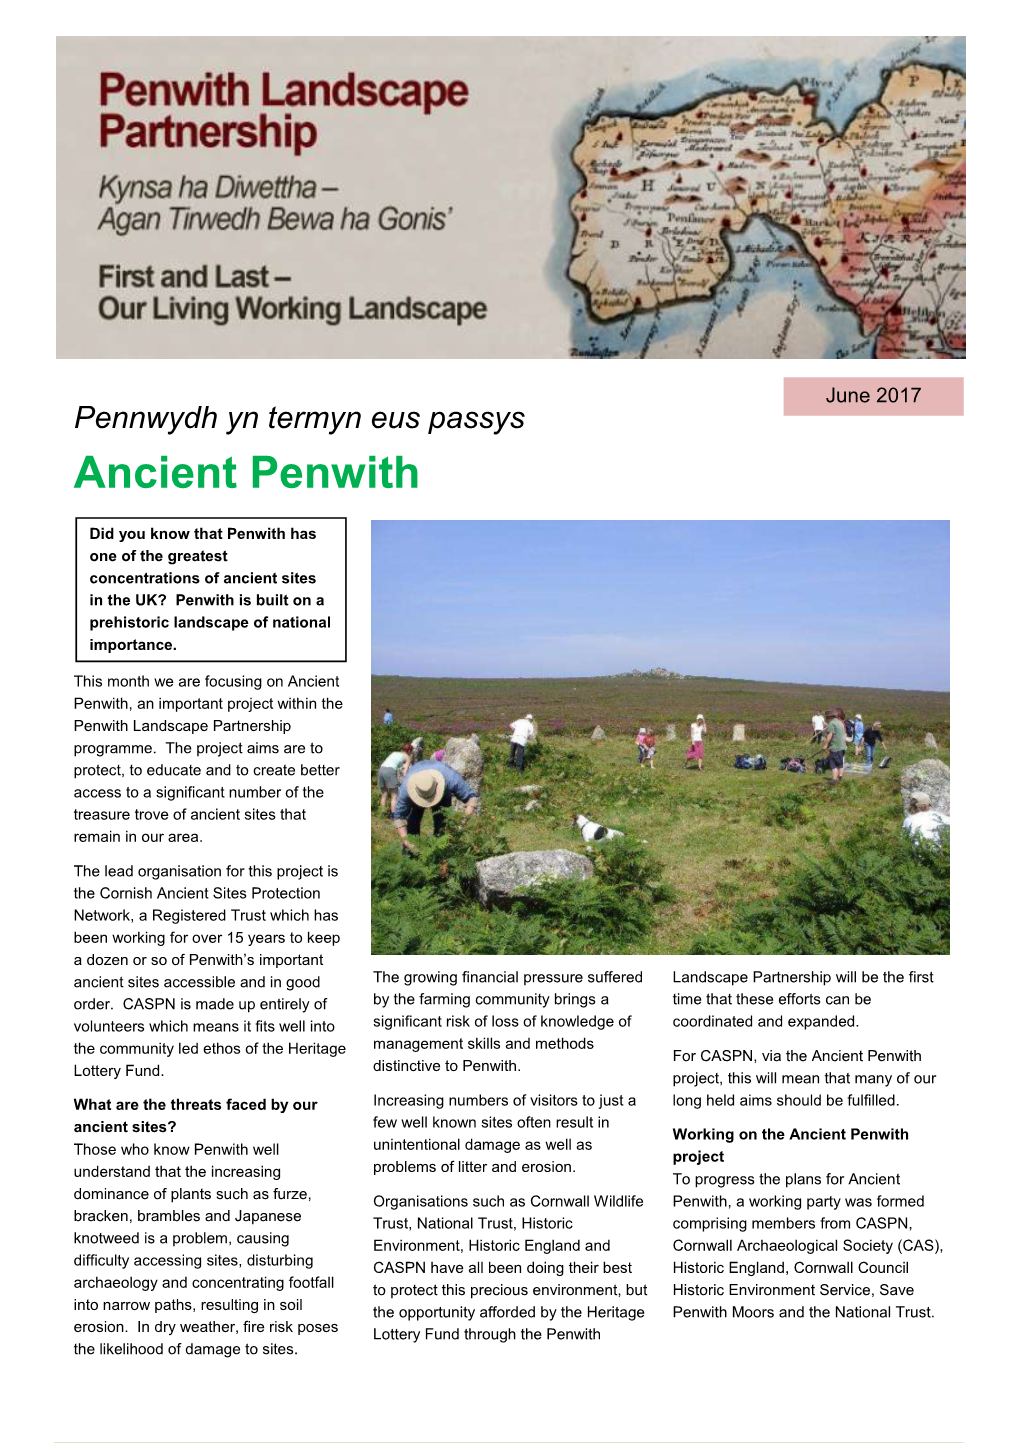 Ancient Penwith